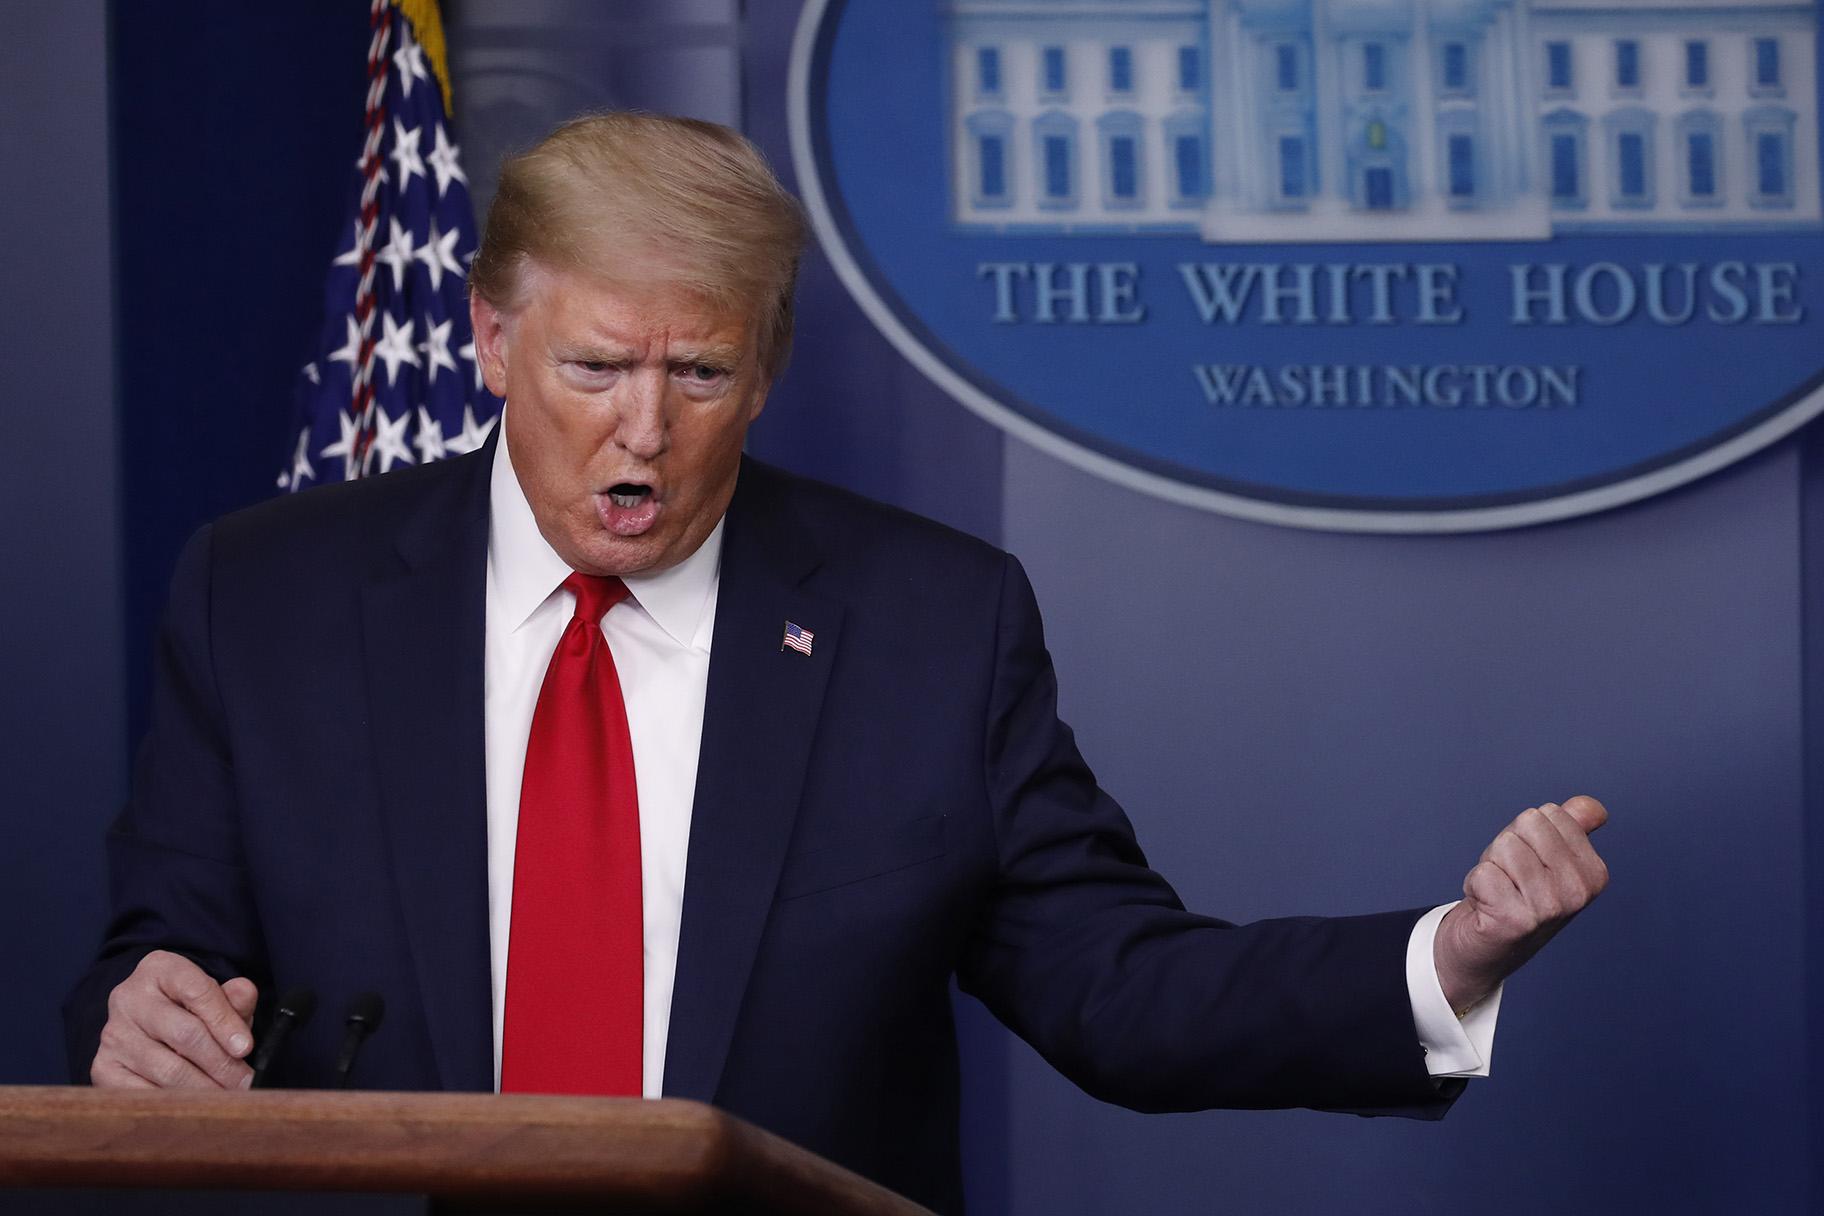 In this April 22, 2020, file photo President Donald Trump speaks about the coronavirus in the James Brady Press Briefing Room of the White House in Washington. (AP Photo / Alex Brandon, File)